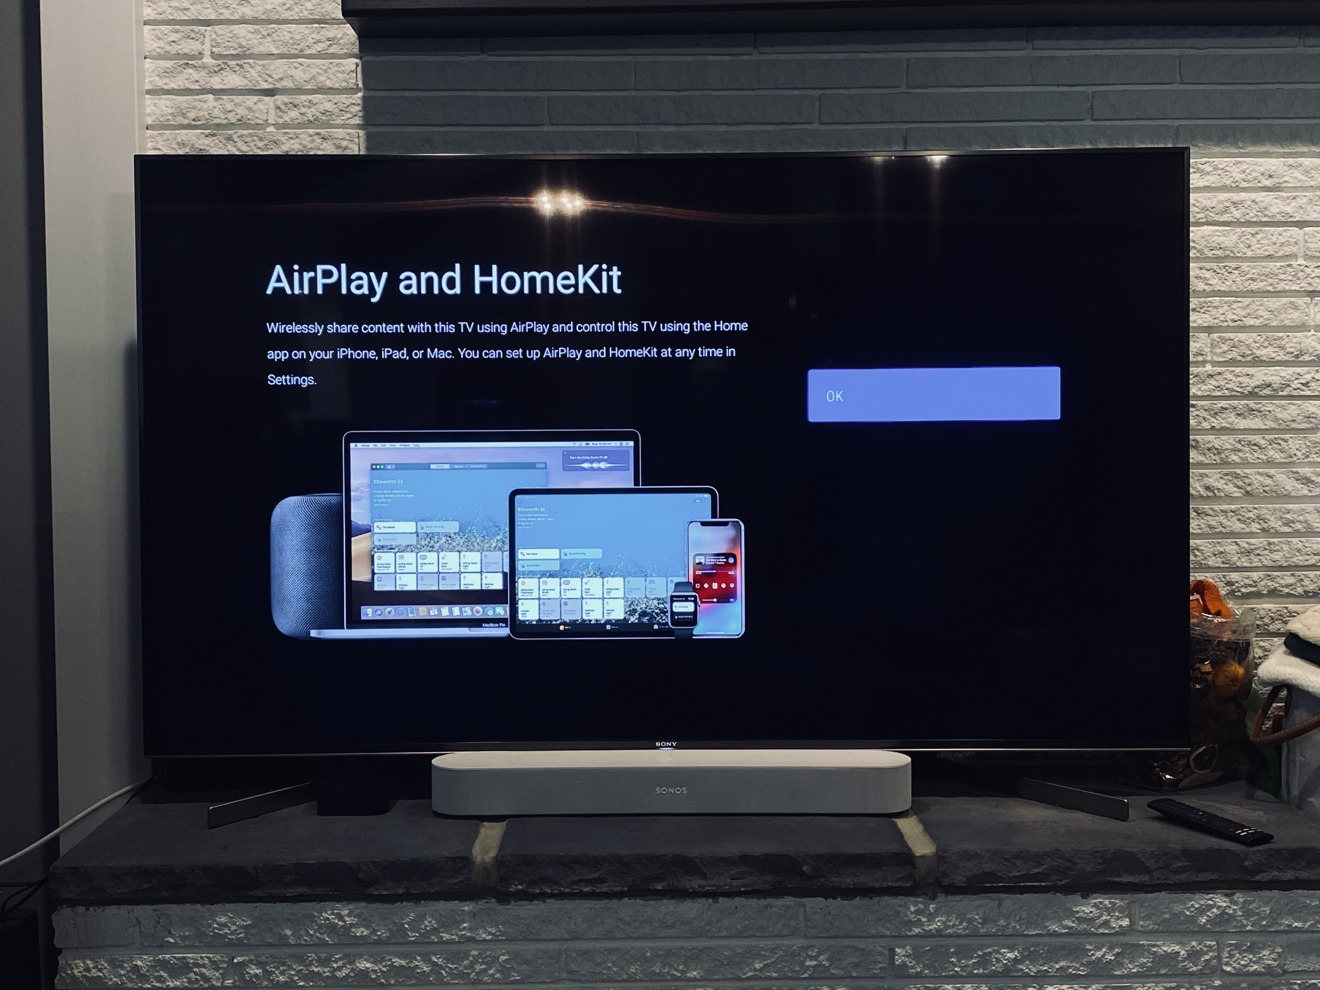 Hot And Airplay 2 On Sony Smart Tvs, Can I Mirror My Mac To Smart Tv